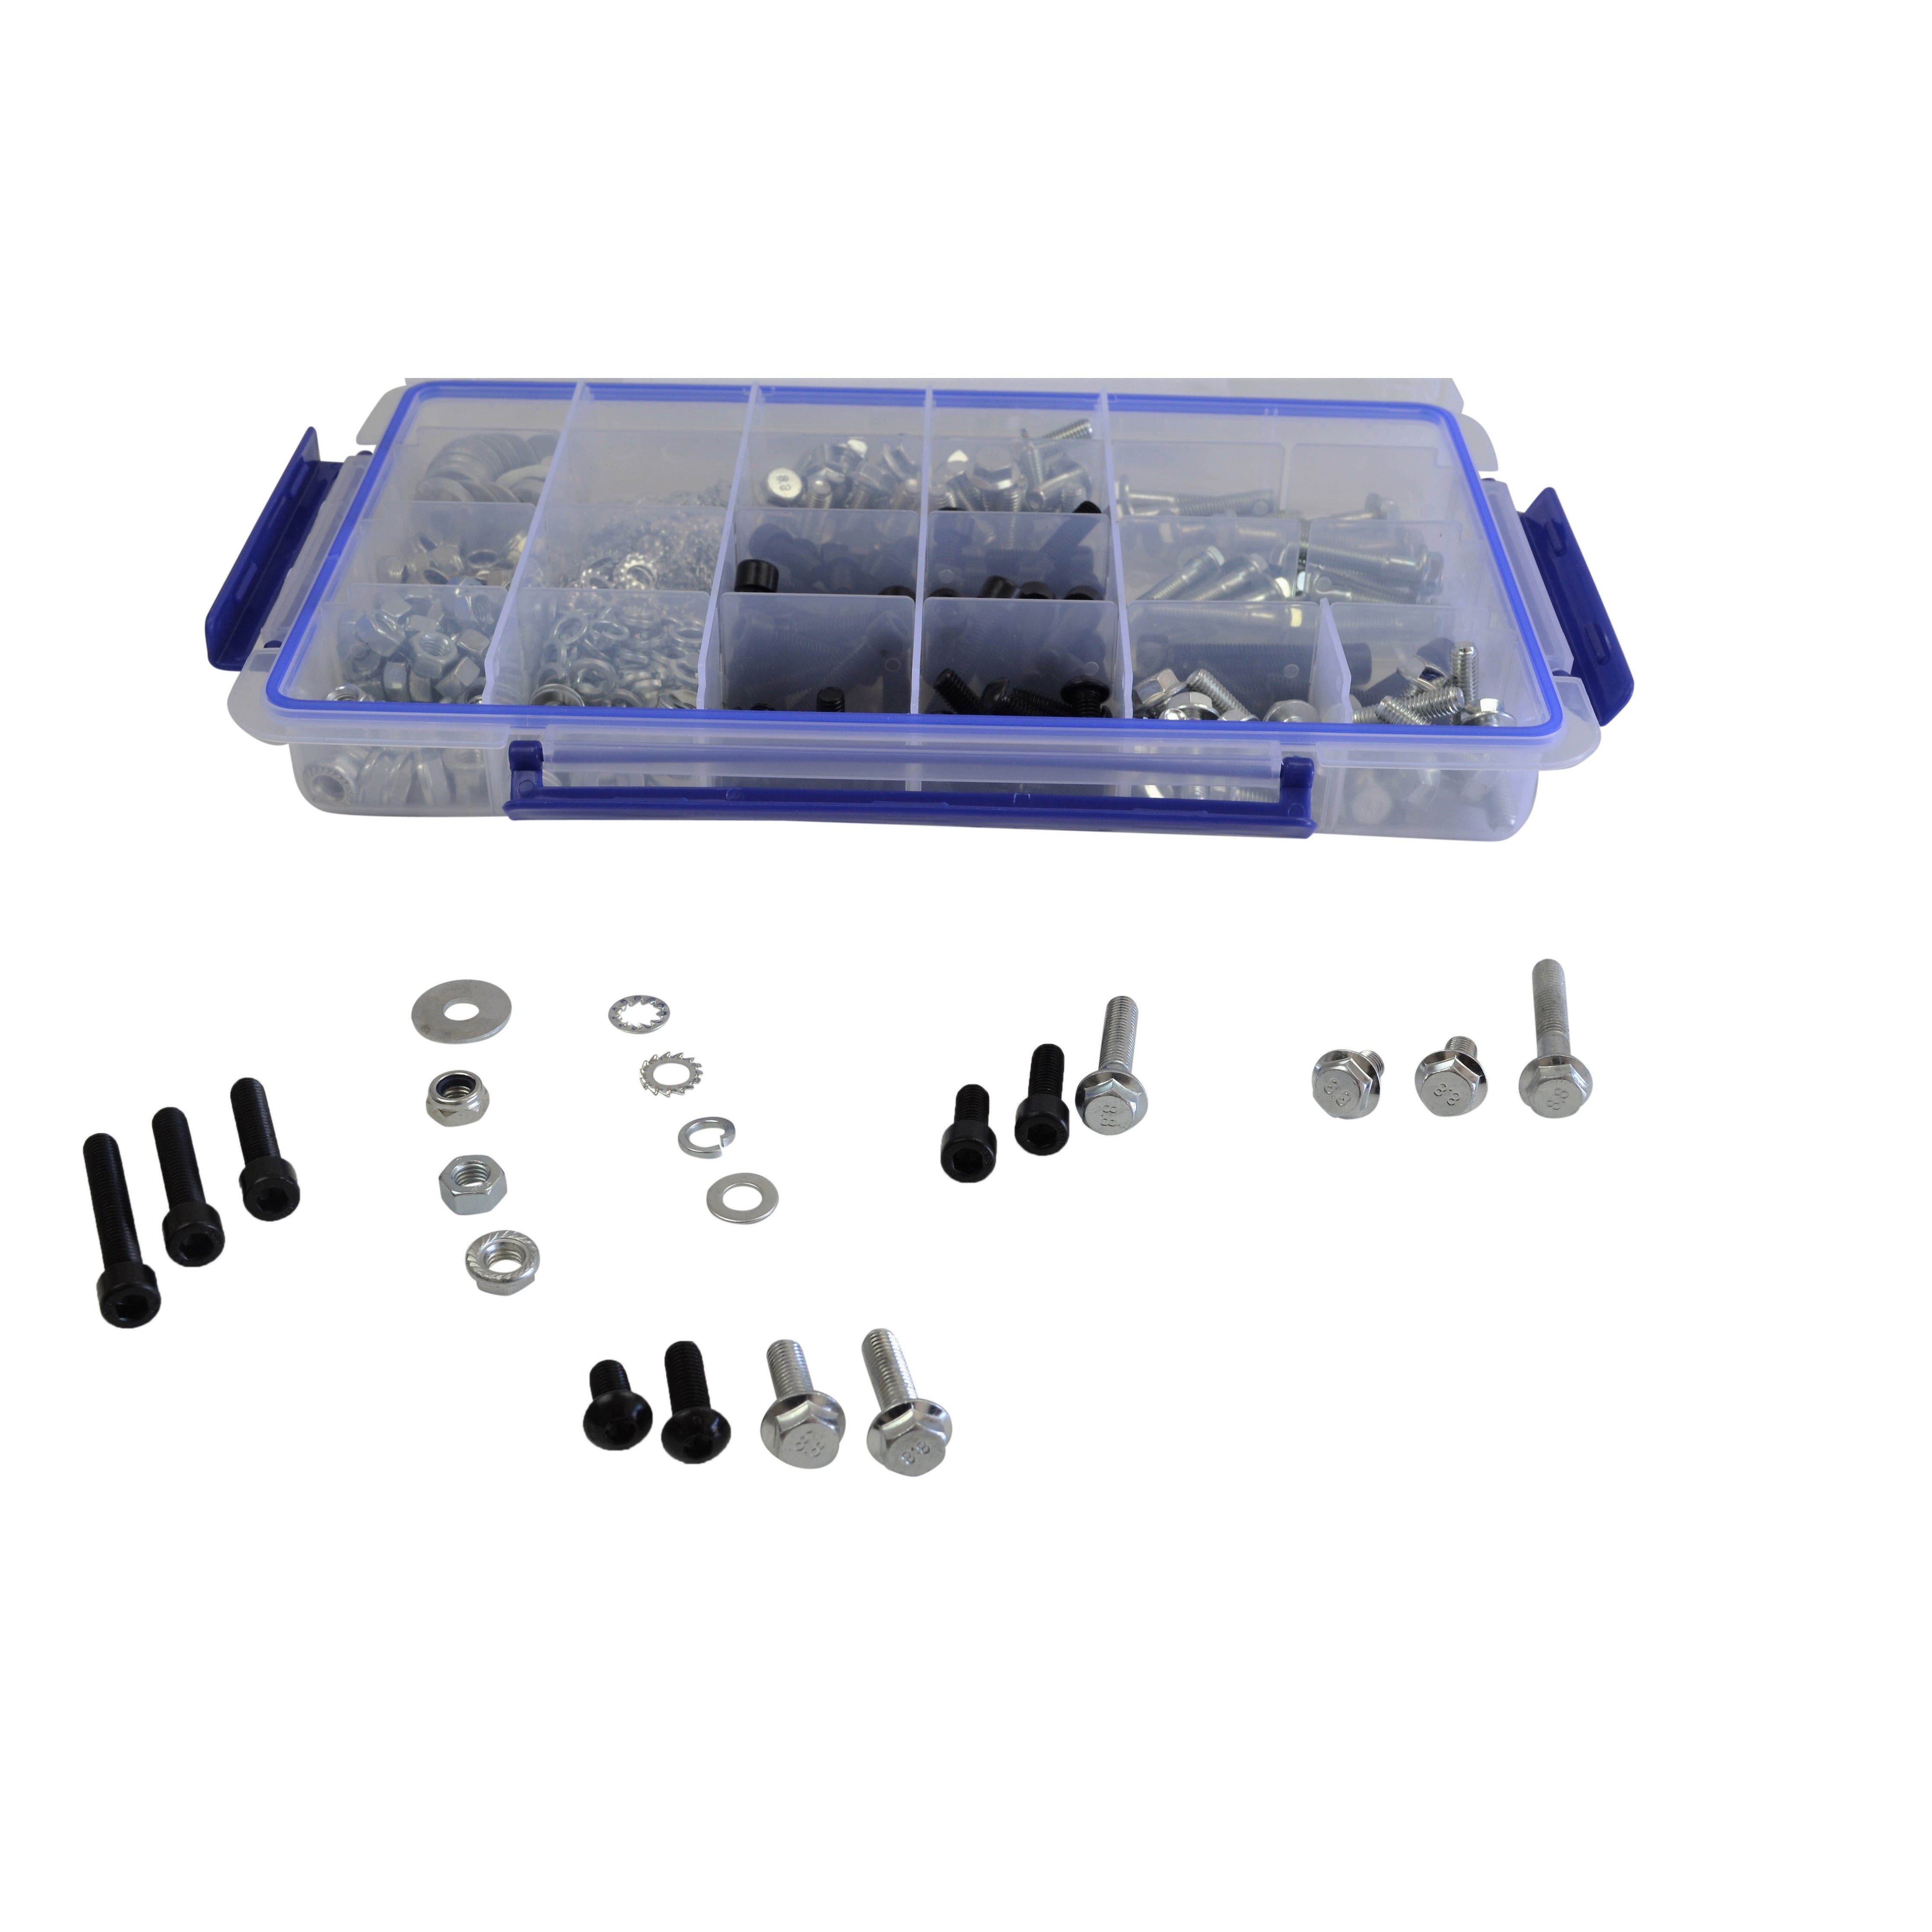 520 Piece Cap Screw Flange Head Nut Bolt And Washer Grab Kit Assortment